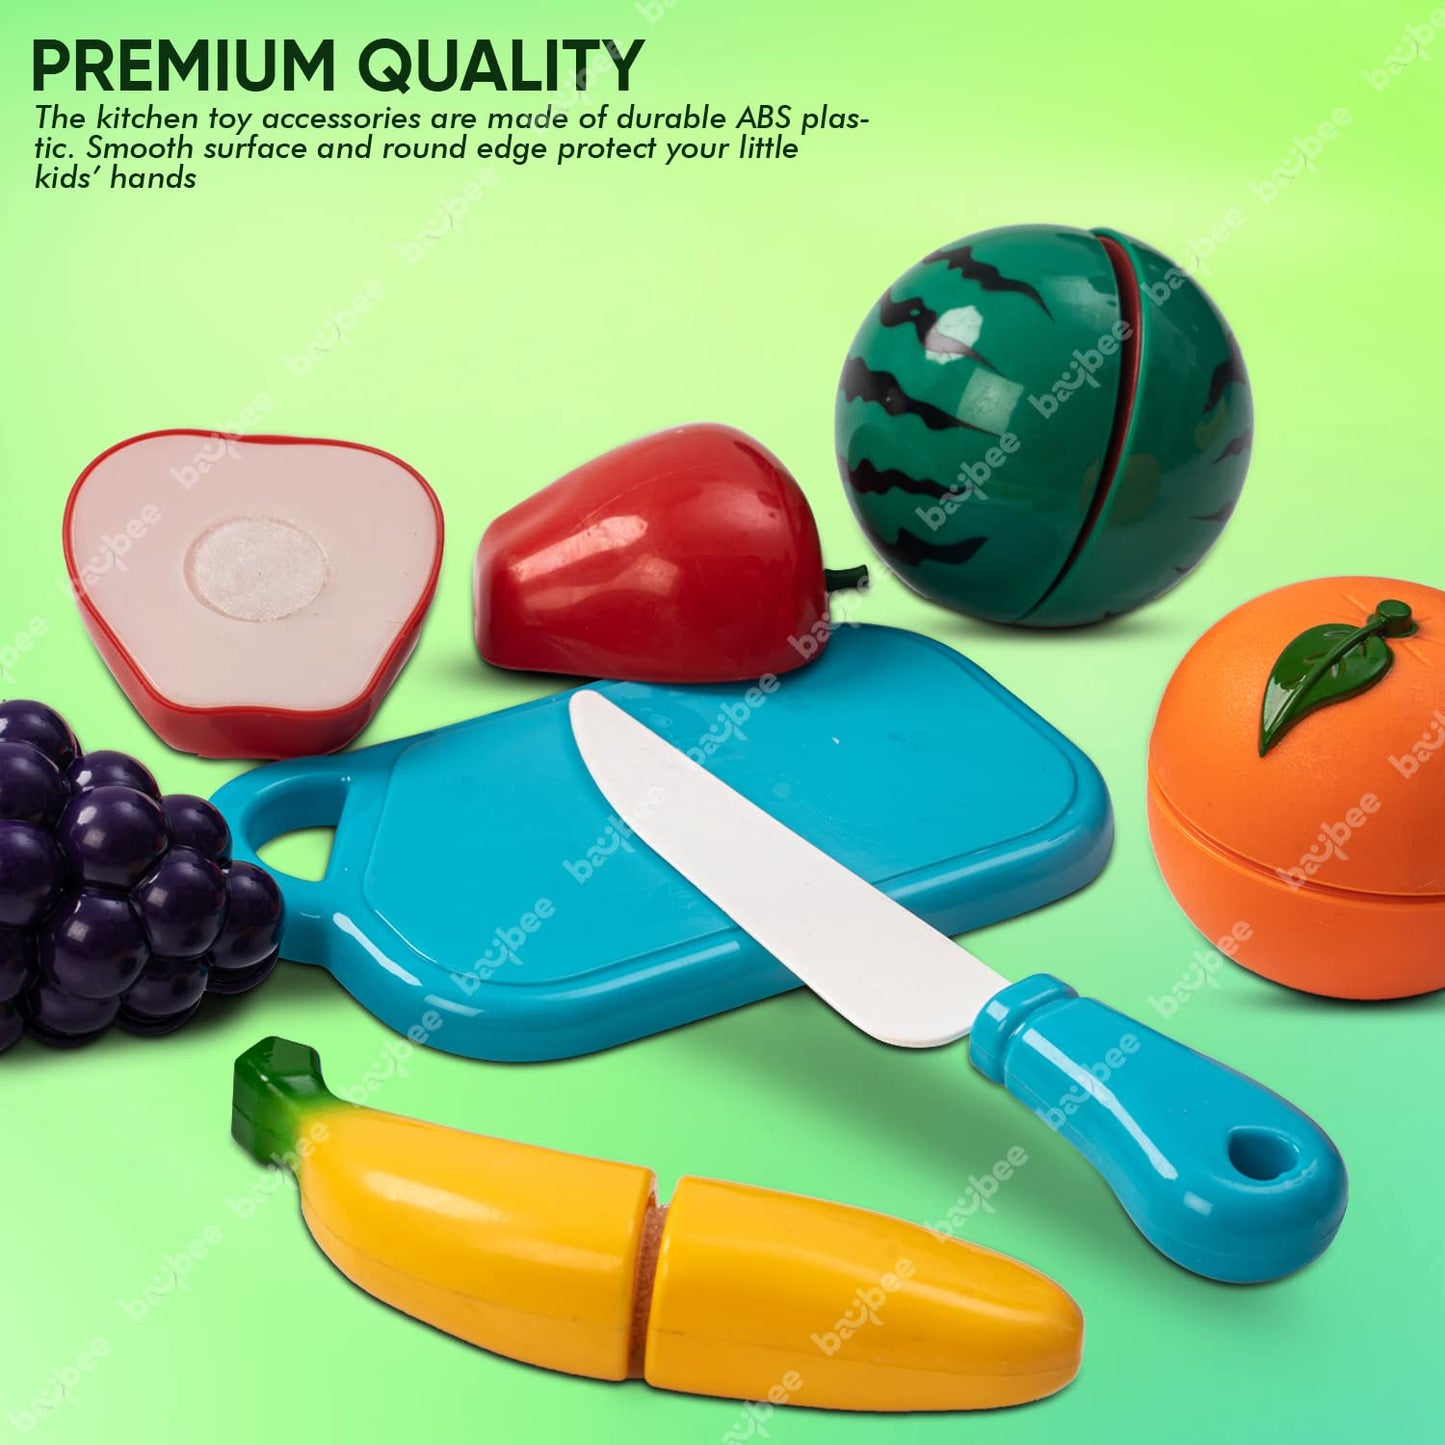 BAYBEE Fruit Toys Set For Kids|5Pcs Realistic Sliceable Fruits Cutting Play Toy|Fruits For Kids Toys With Knife & Cutting Board